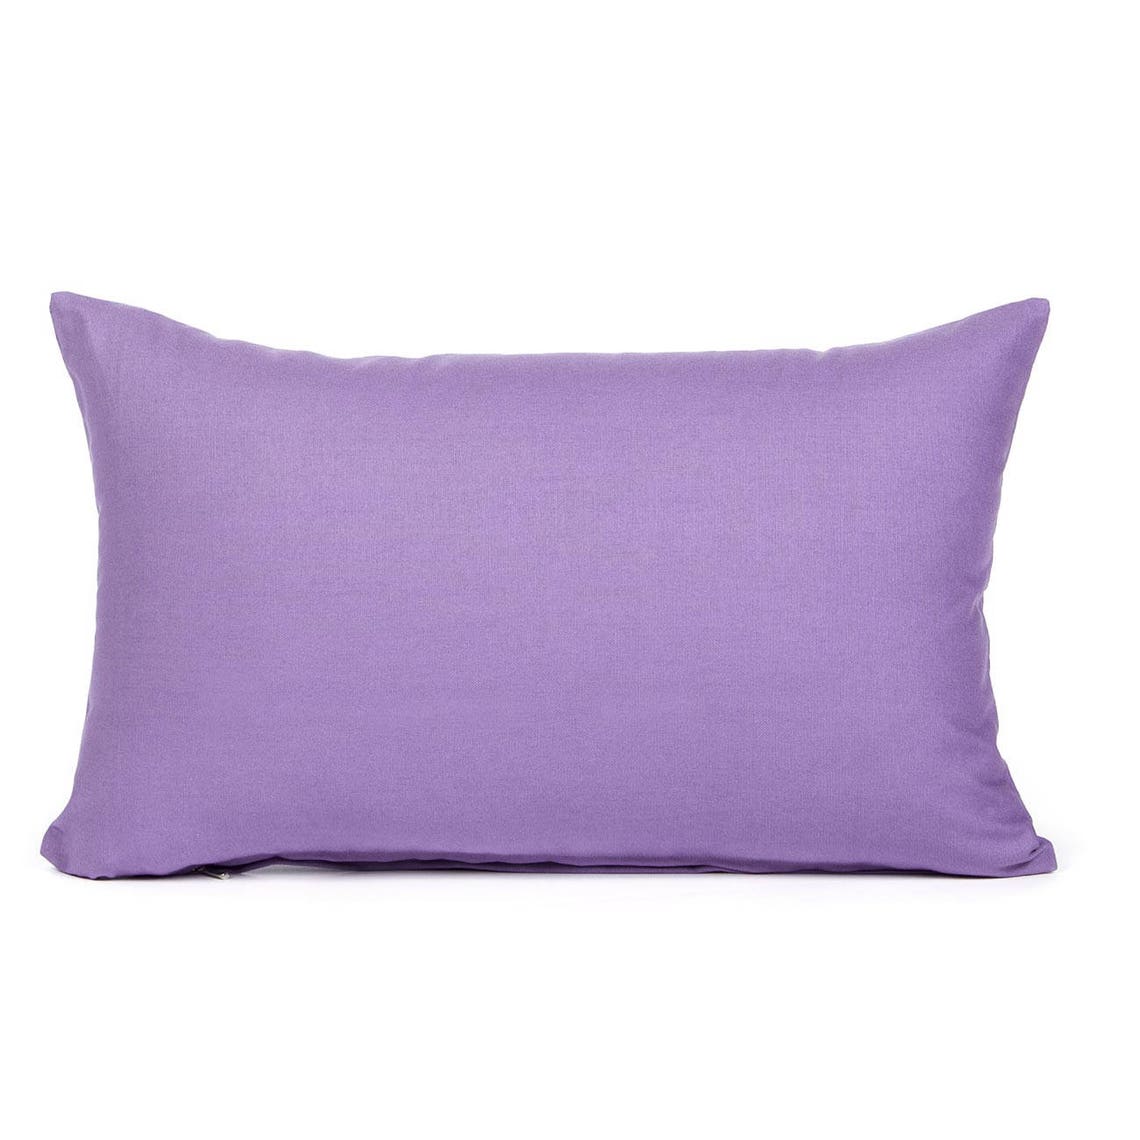 Throw Pillow Cover Lavender Decorative Pillow Cover Cushion | Etsy